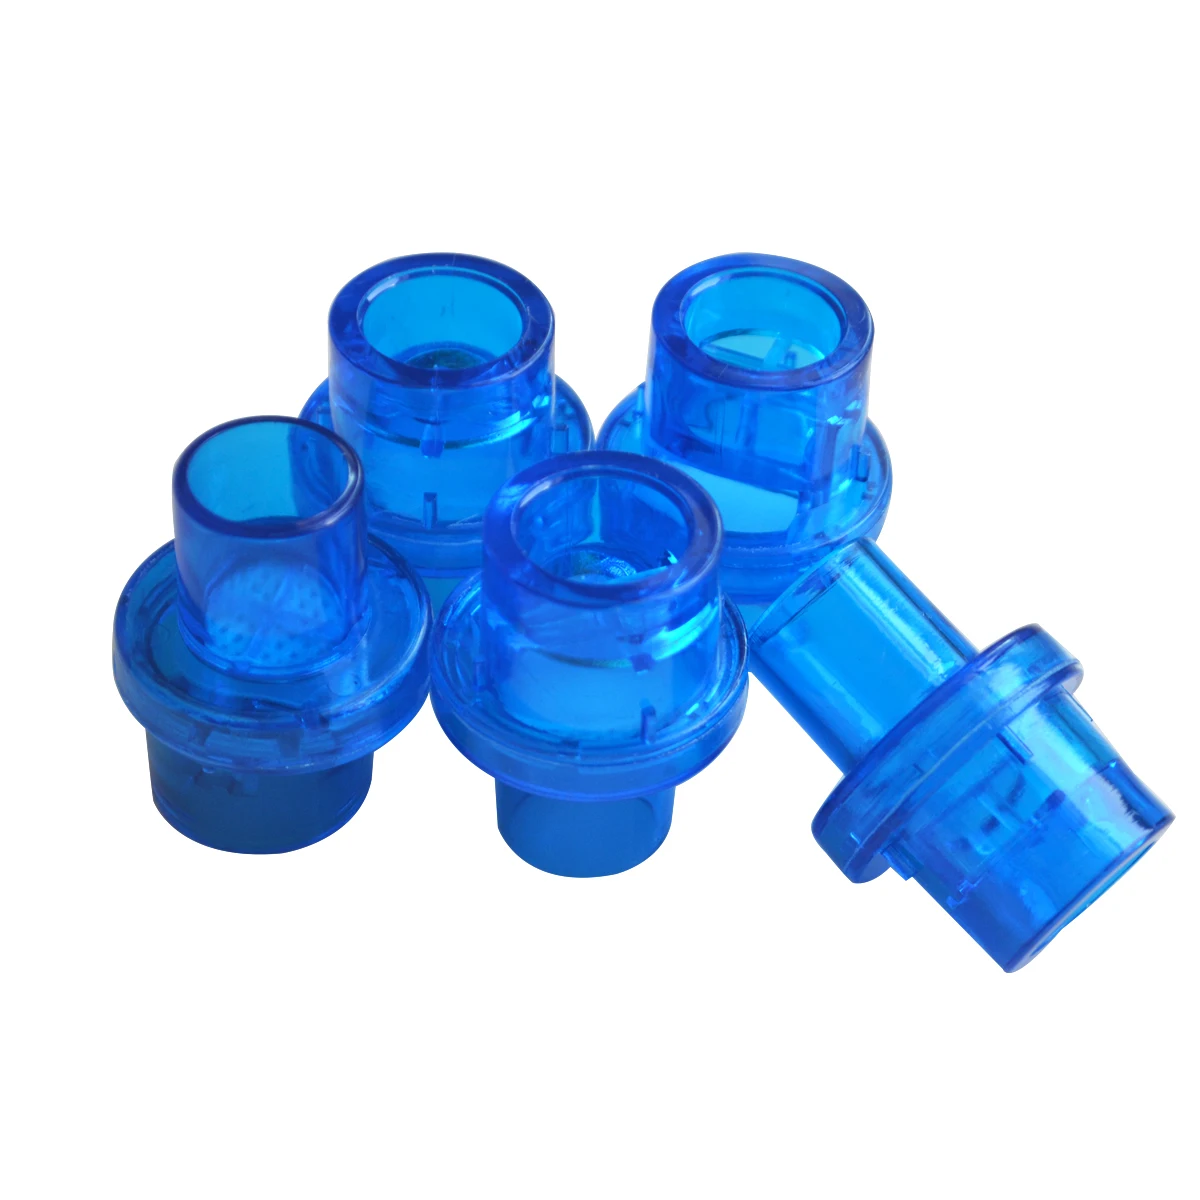 Pocket CPR Oxygen Inlet Accessories Mouthpiece For CPR Resuscitator Mask mouthpiece for CPR One-way Valve AED training